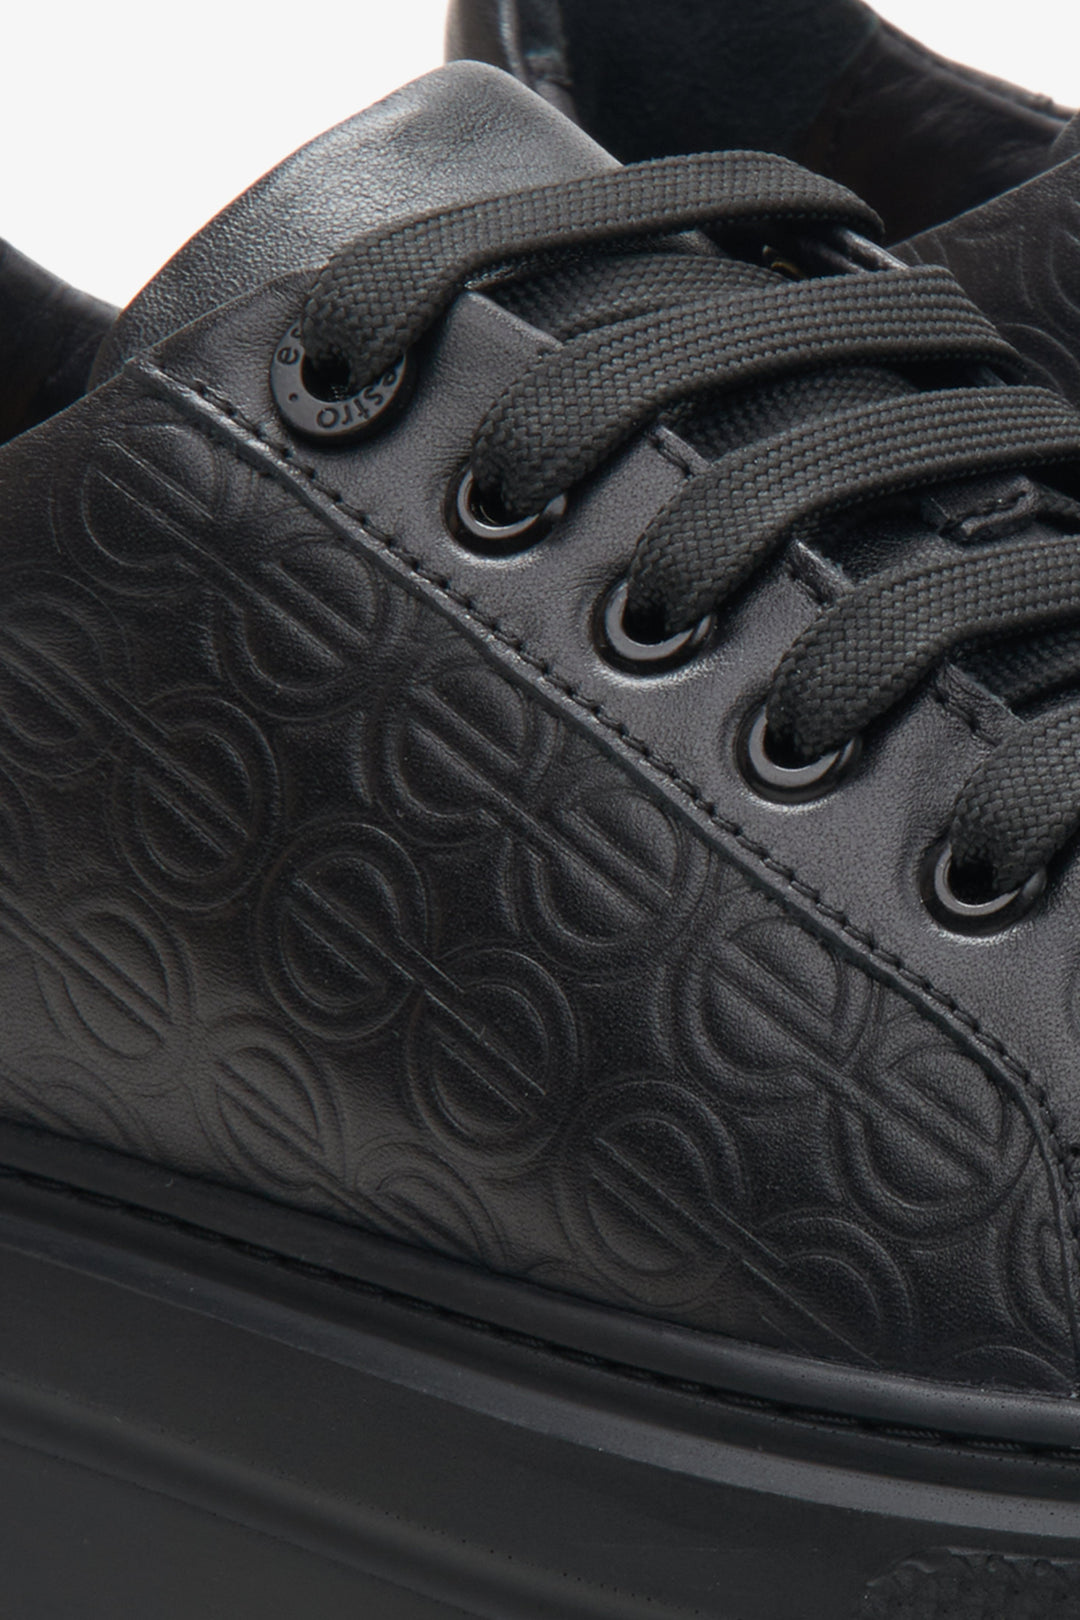 Women's black leather sneakers by Estro - close-up on the details.